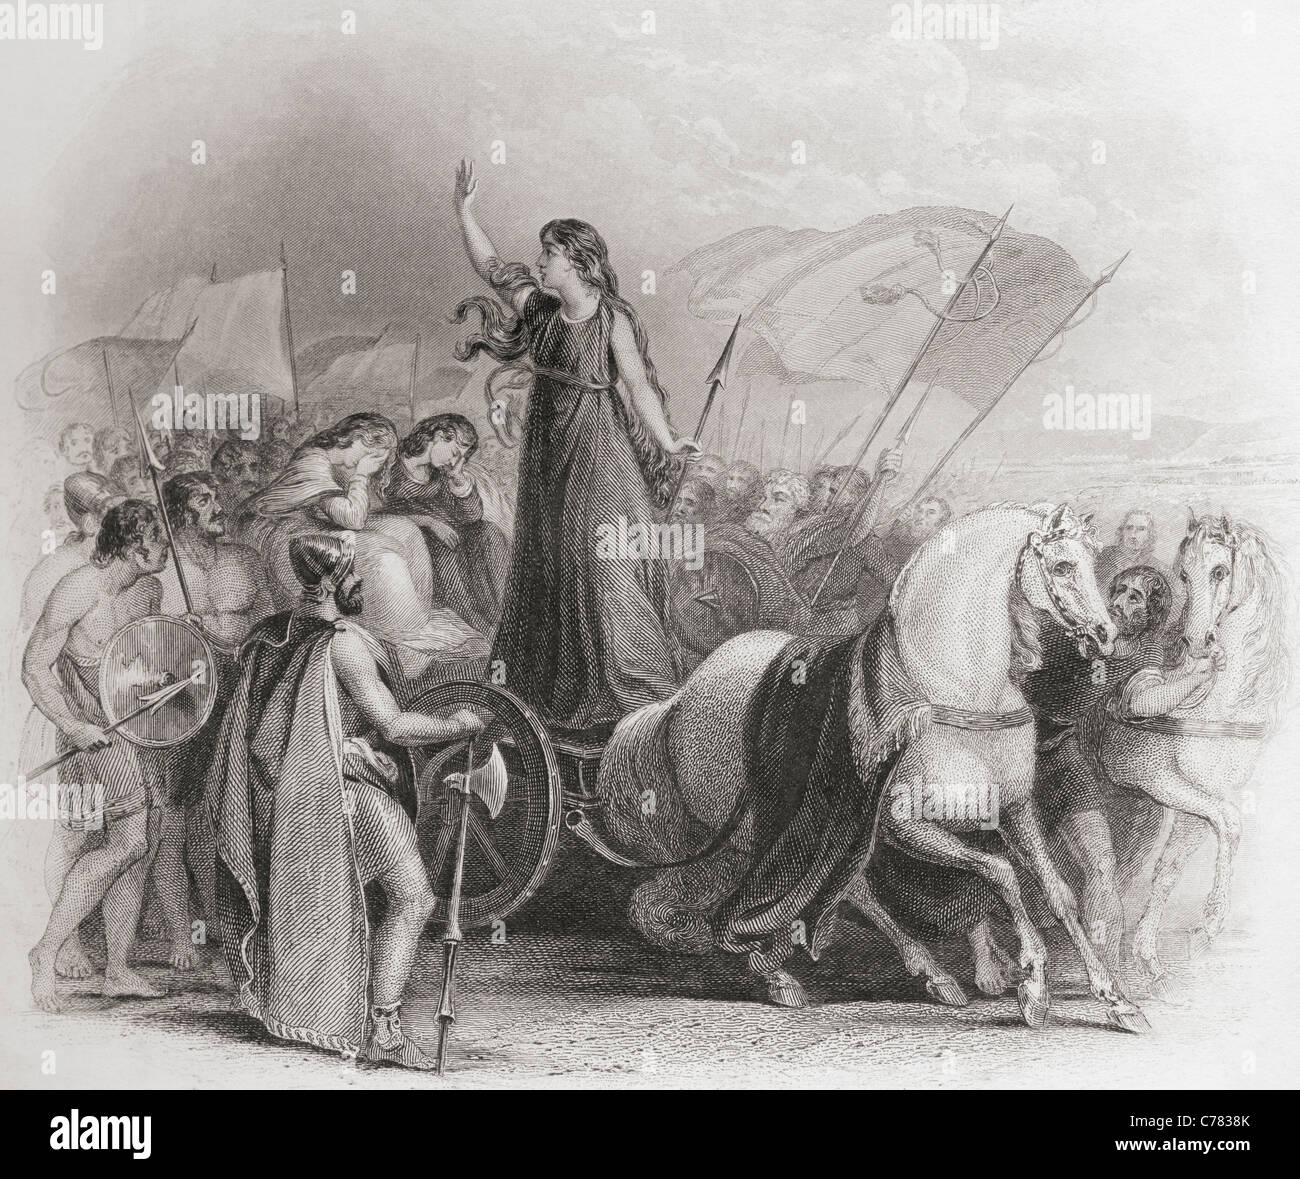 Boadicea Haranguing the Britons. Boudica, ? - d. AD 60 or 61. Queen of the British Iceni tribe. Stock Photo